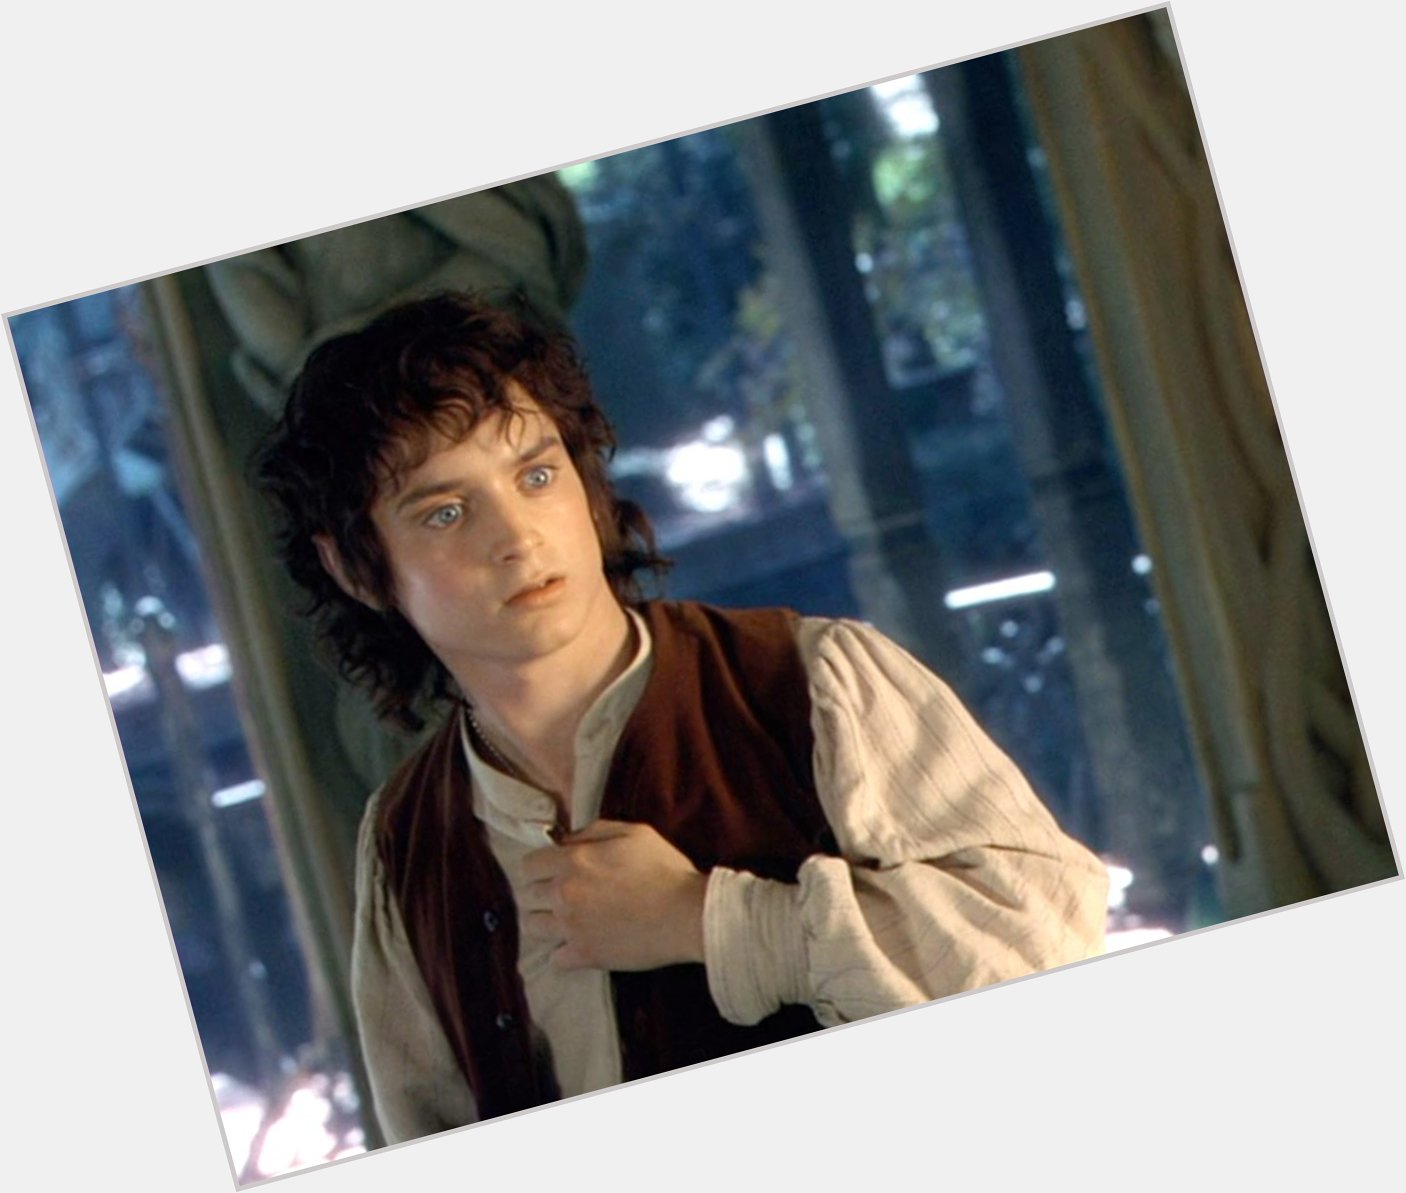 Happy 39th Birthday to Frodo Baggins in the Lord of the Rings film series, Elijah Wood. 